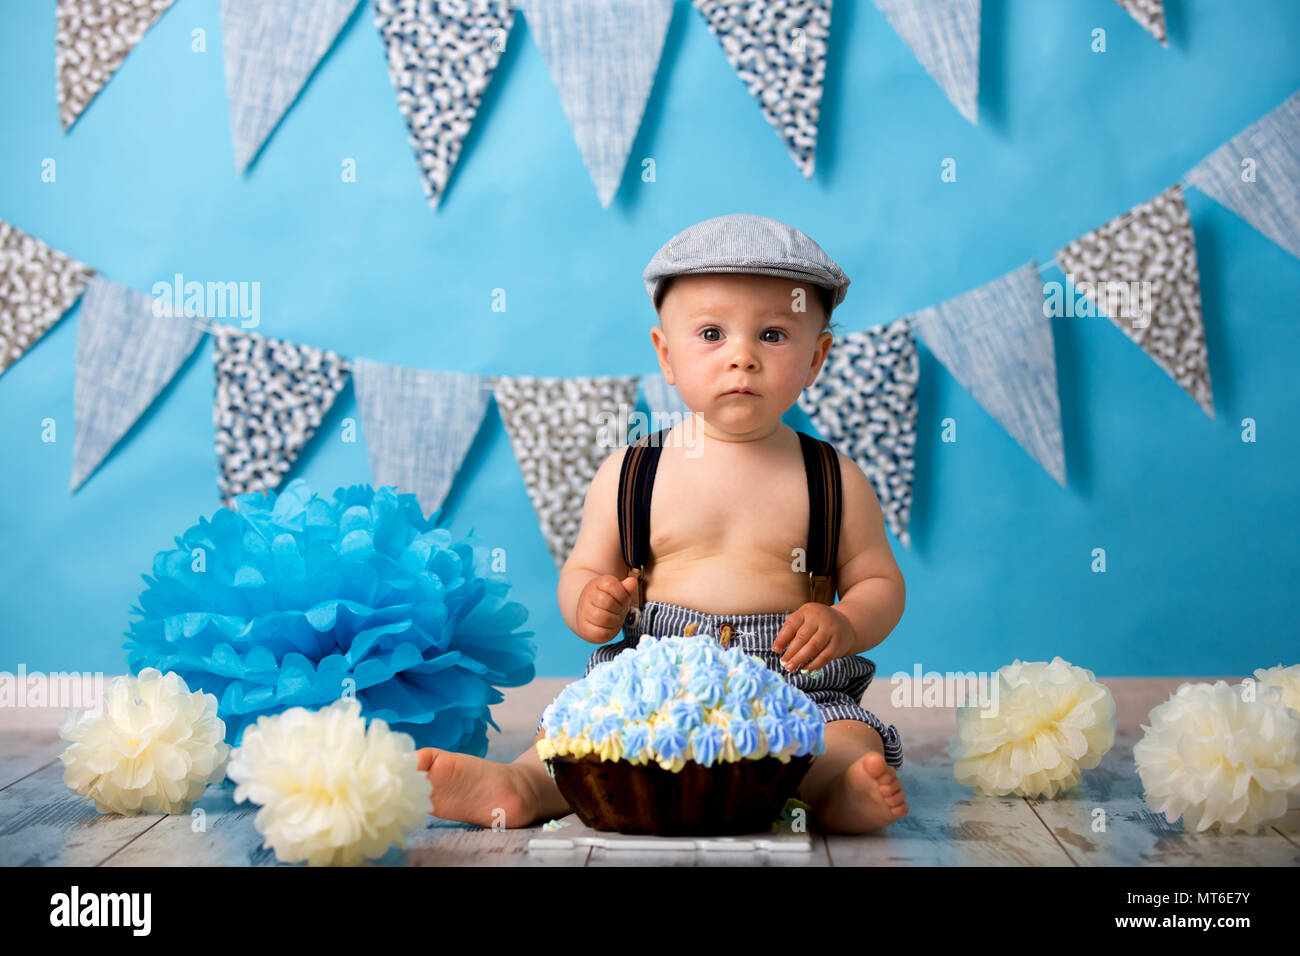 Smash Cakes Are All The Rage for 1st Birthdays in Hawaii | Cake Works Bakery